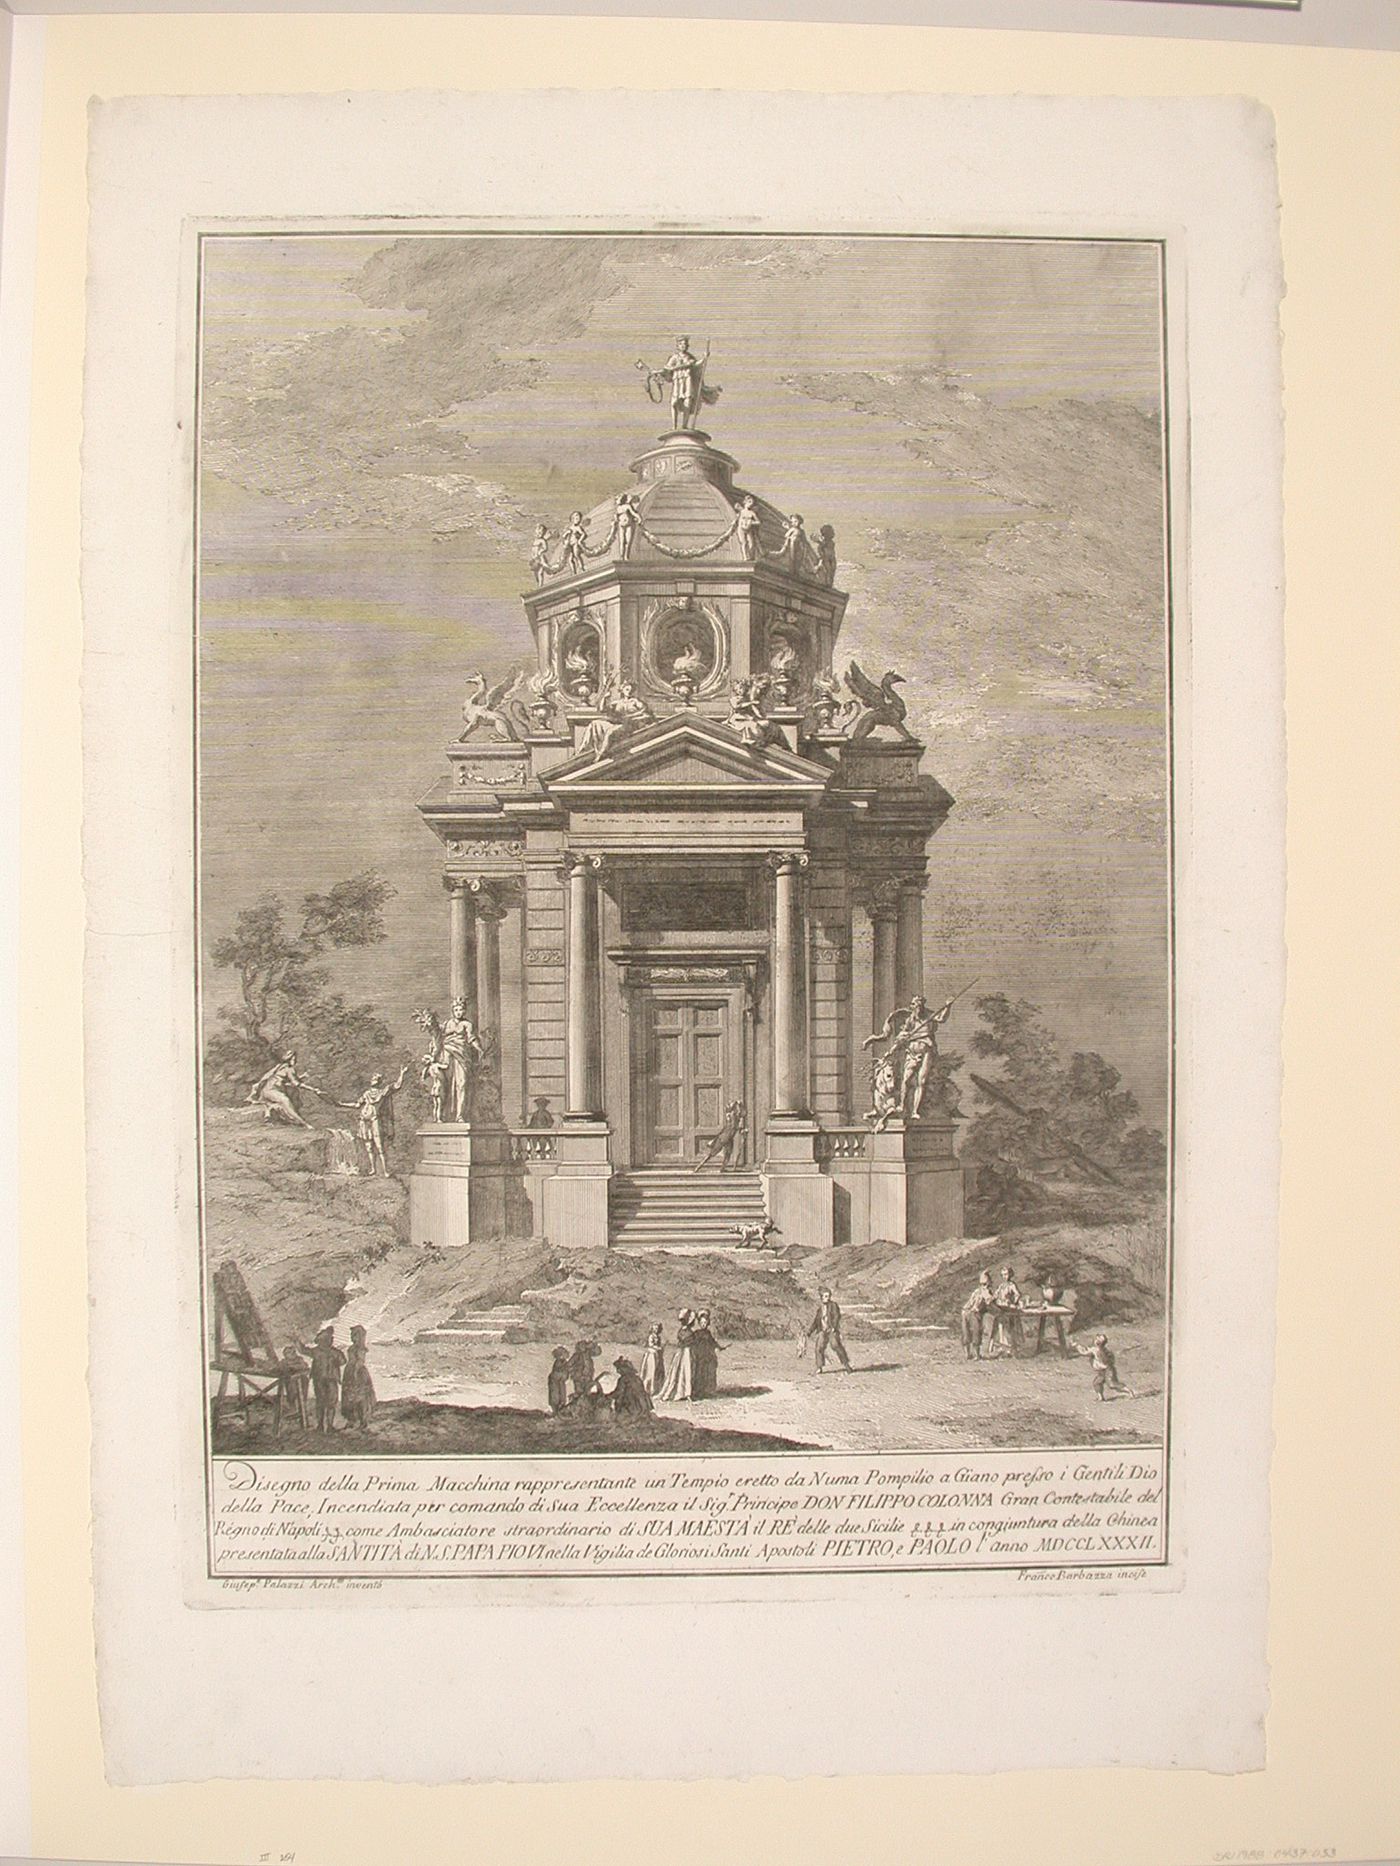 Etching of Palazzi's design for the "prima macchina" of 1782